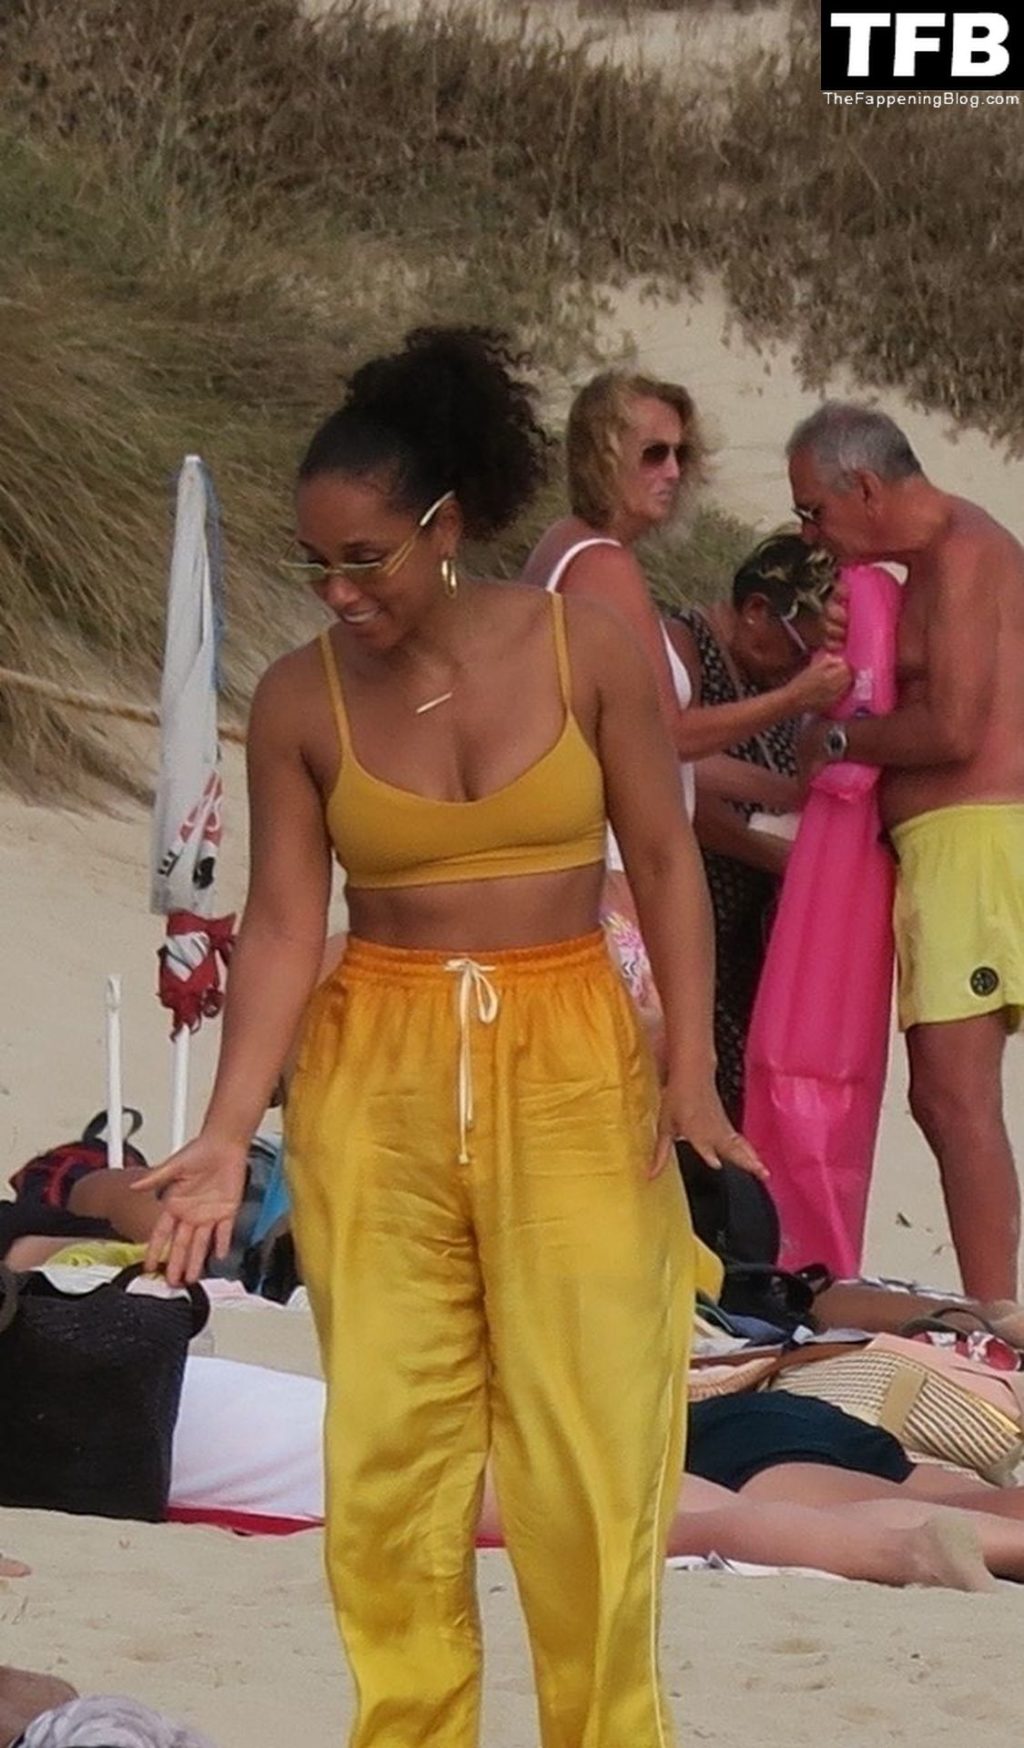 Alicia Keys Enjoys a Beach Day with Family While Vacationing in Formentera (37 Photos)